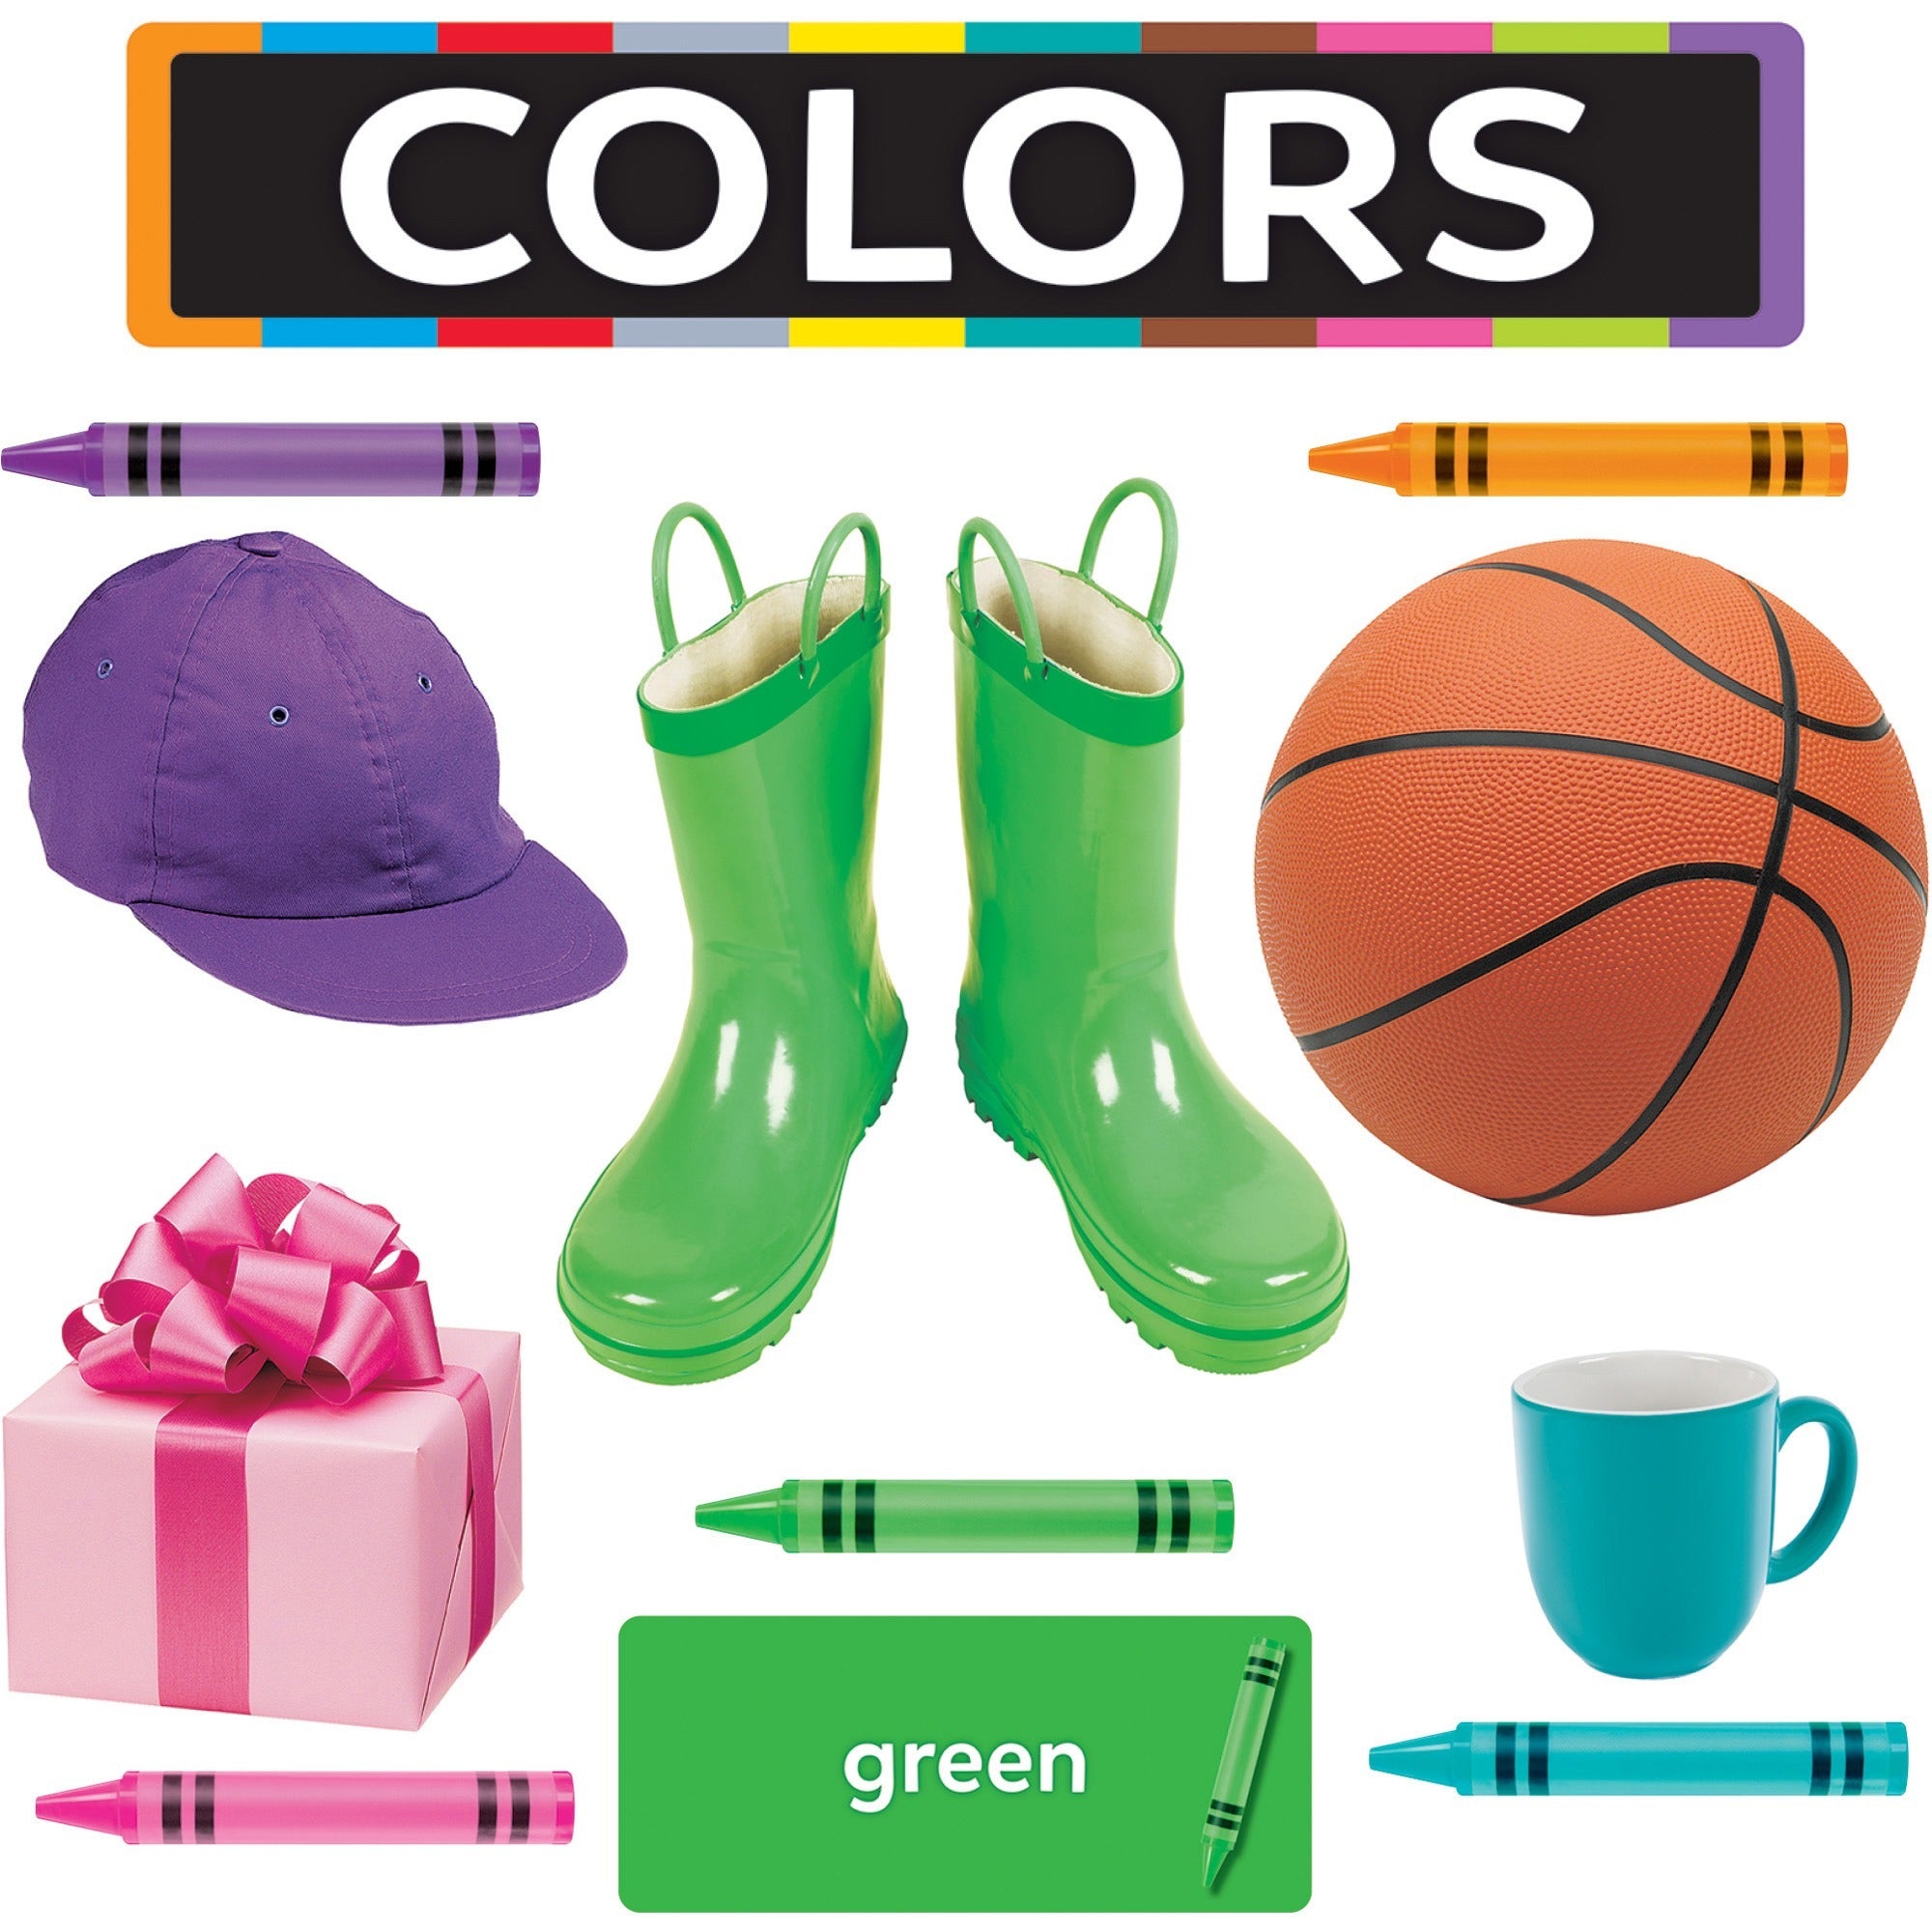 trend-colors-all-around-us-learning-set-learning-theme-subject-durable-reusable-sturdy-multi-1-each_tept19005 - 1